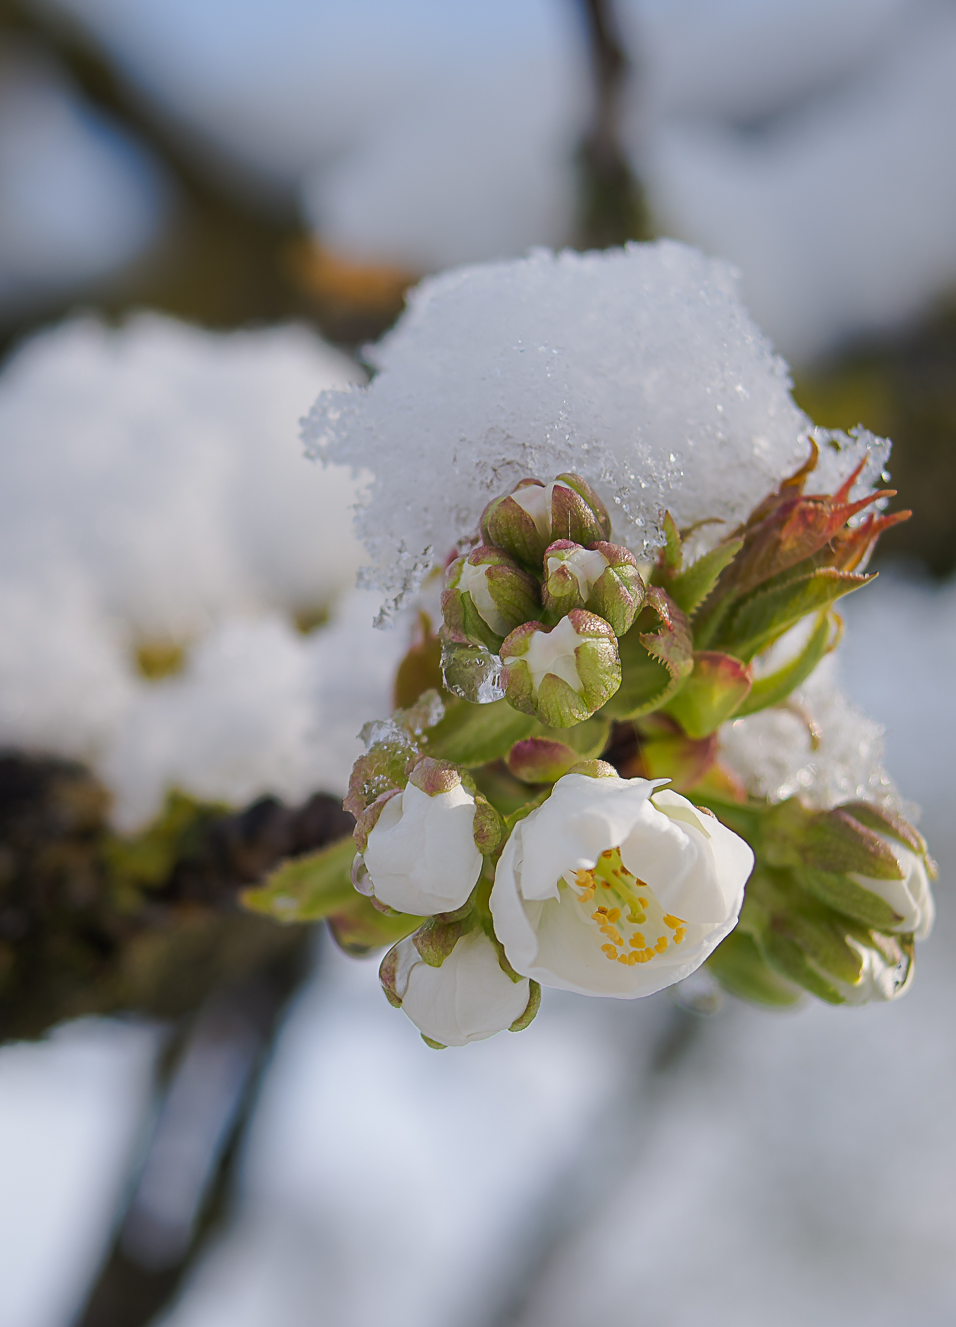 Snow on the cherry in bloom...